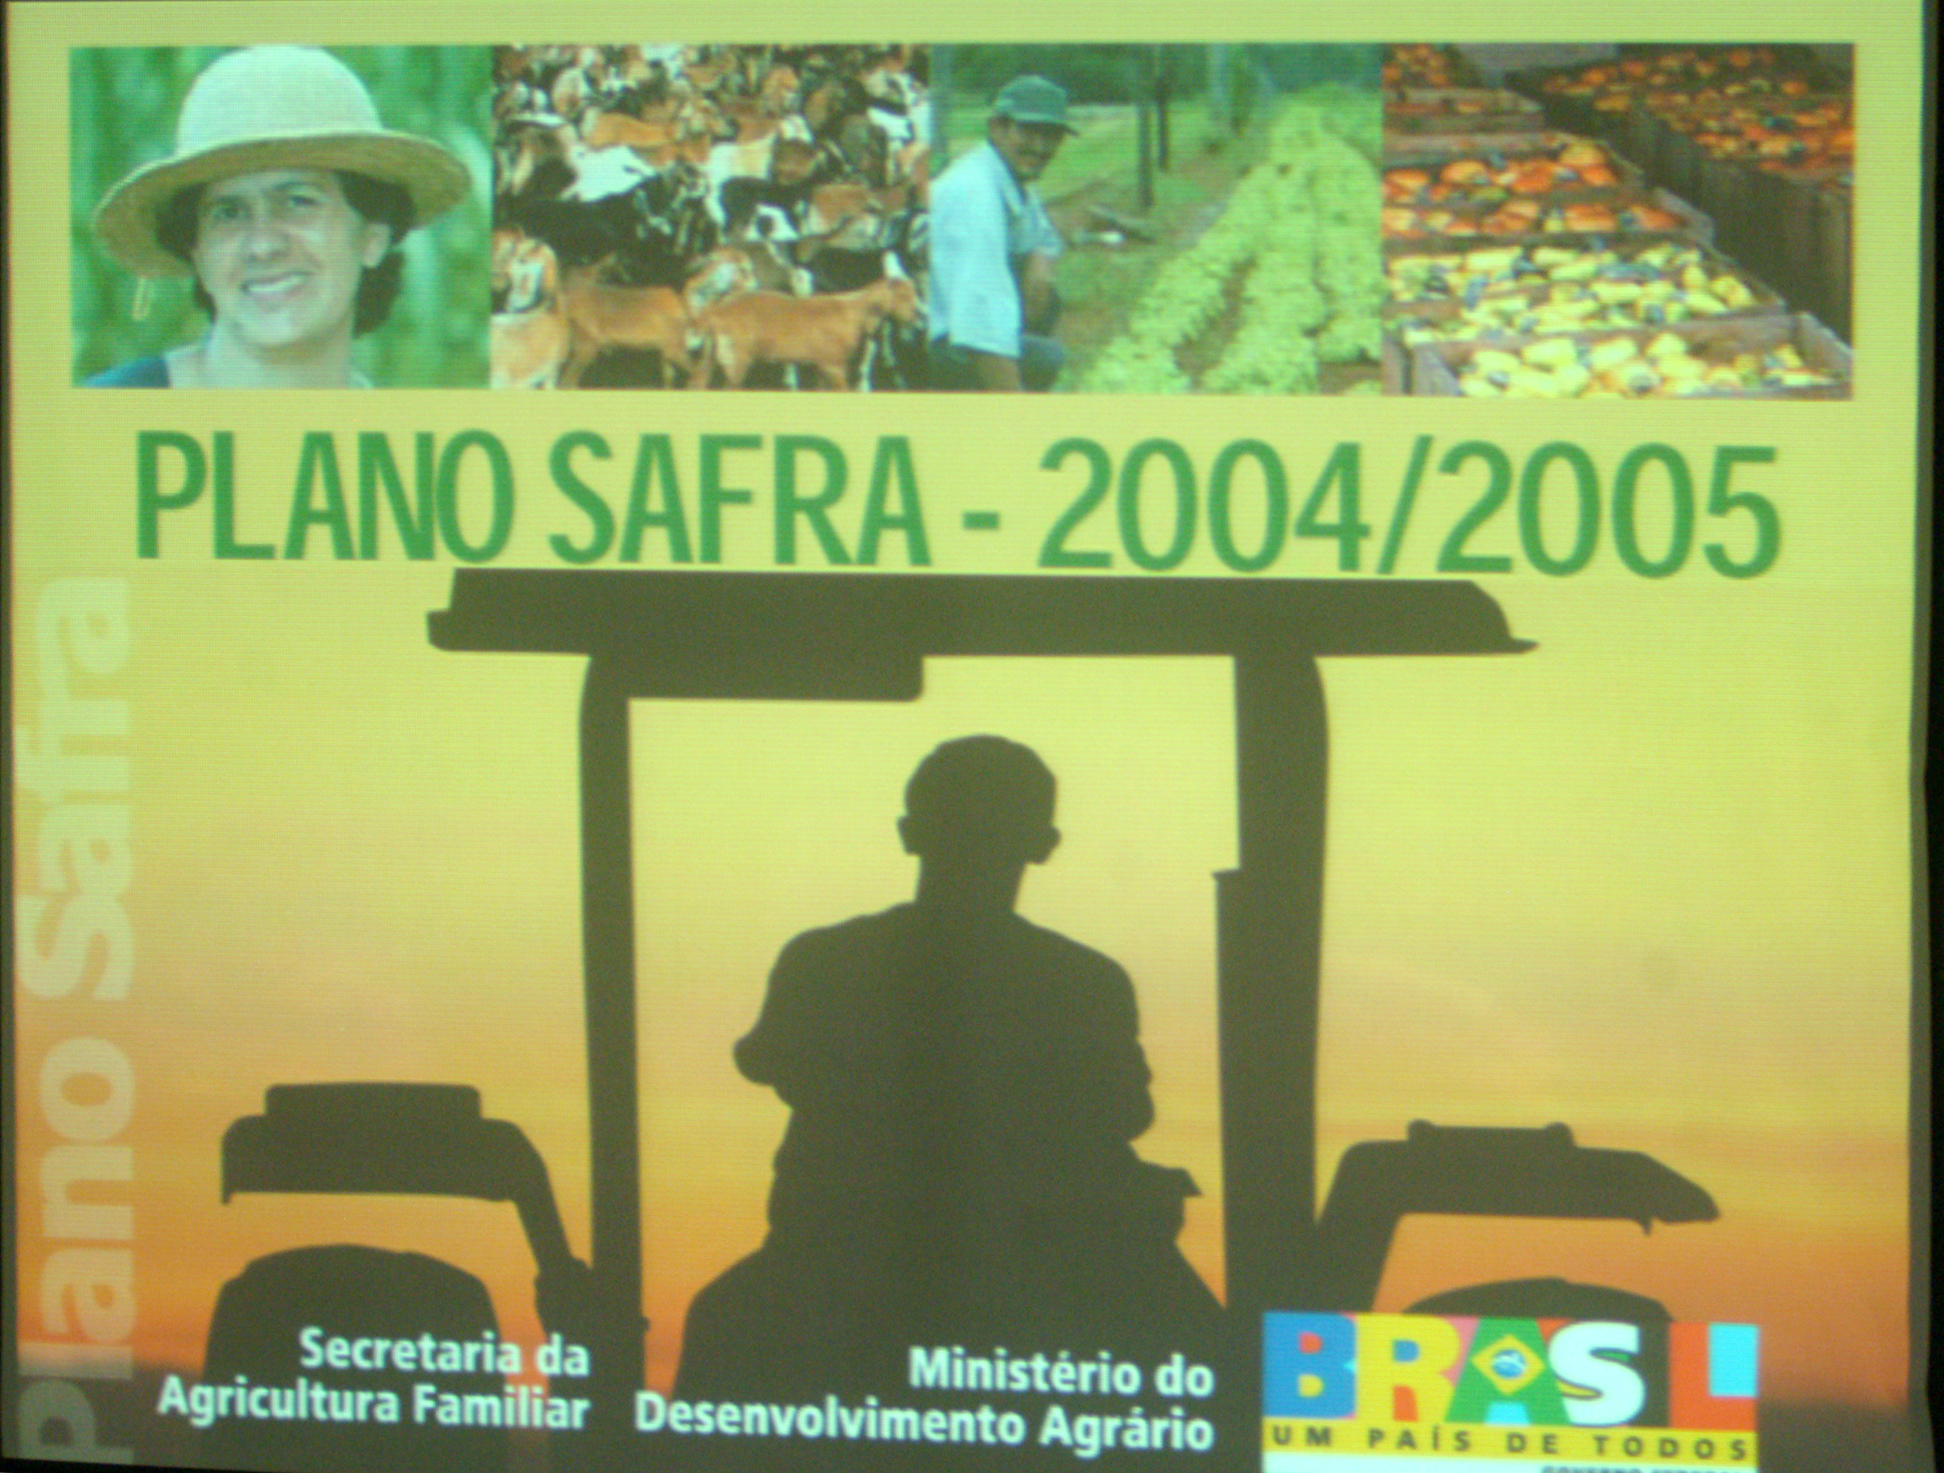 Plano Safra 2004/2005<a style='float:right;color:#ccc' href='https://www3.al.sp.gov.br/repositorio/noticia/hist/agricpainel.jpg' target=_blank><i class='bi bi-zoom-in'></i> Clique para ver a imagem </a>